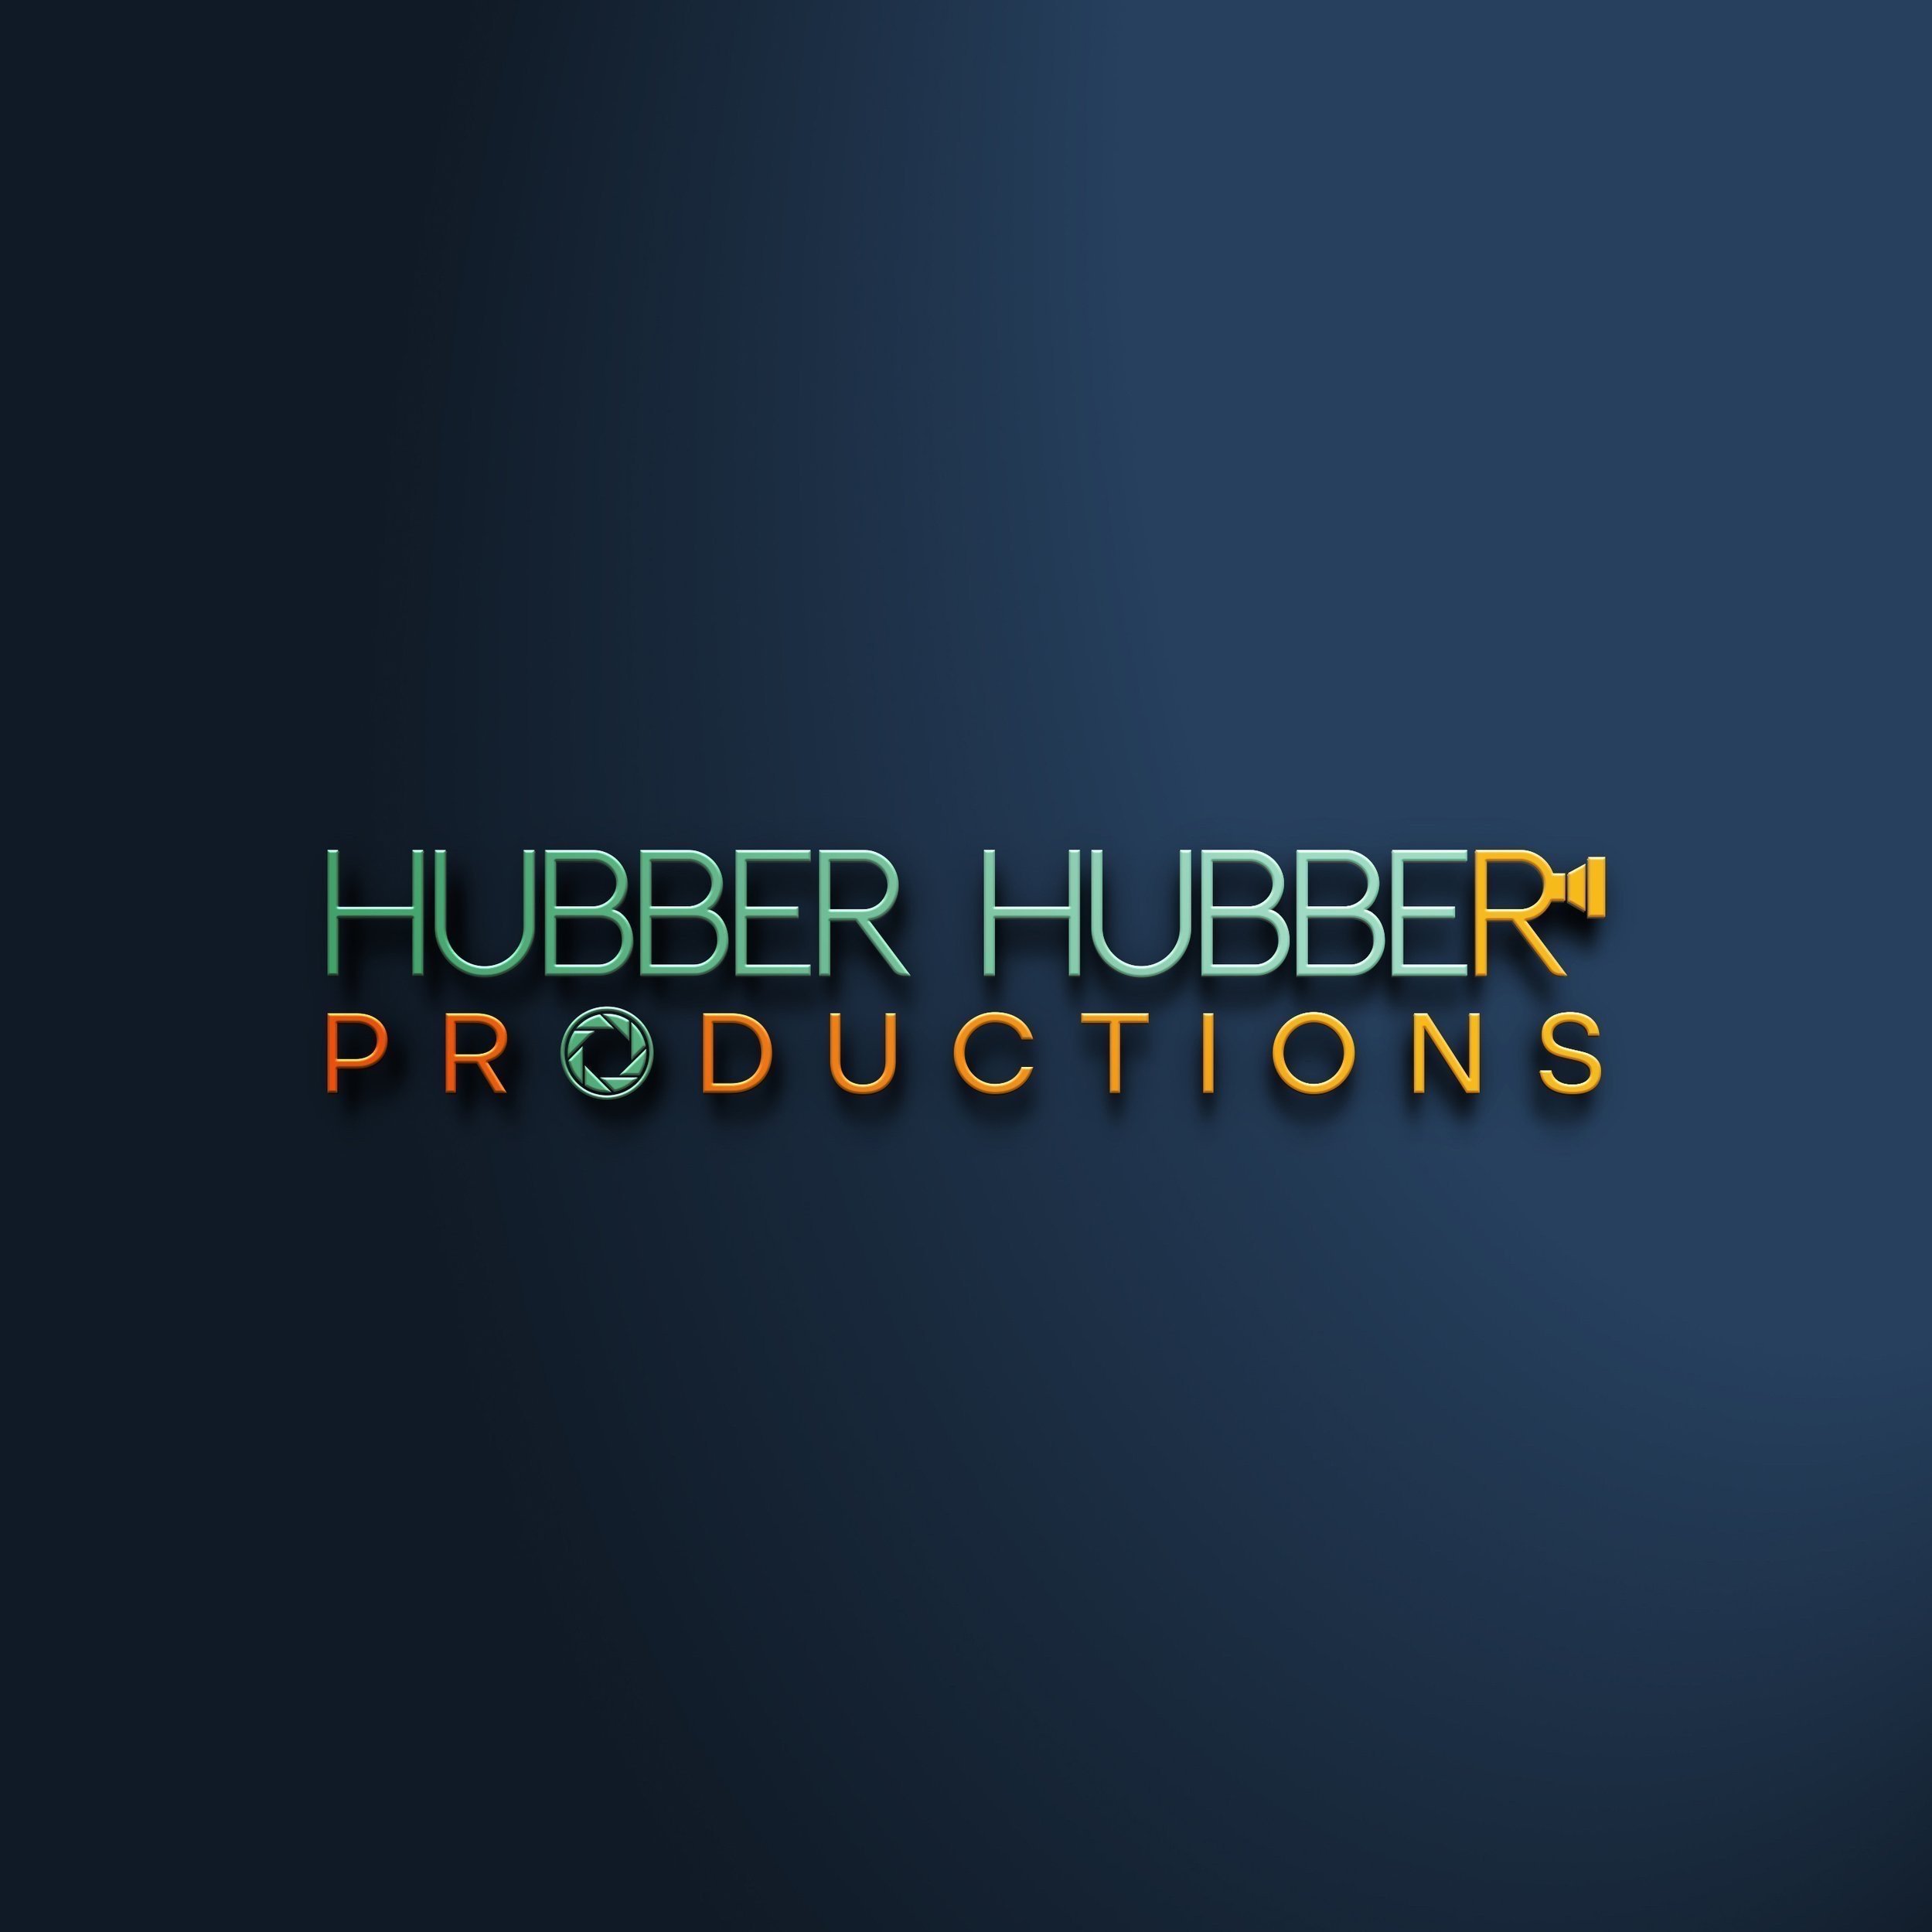 Hubber Hubber Productions